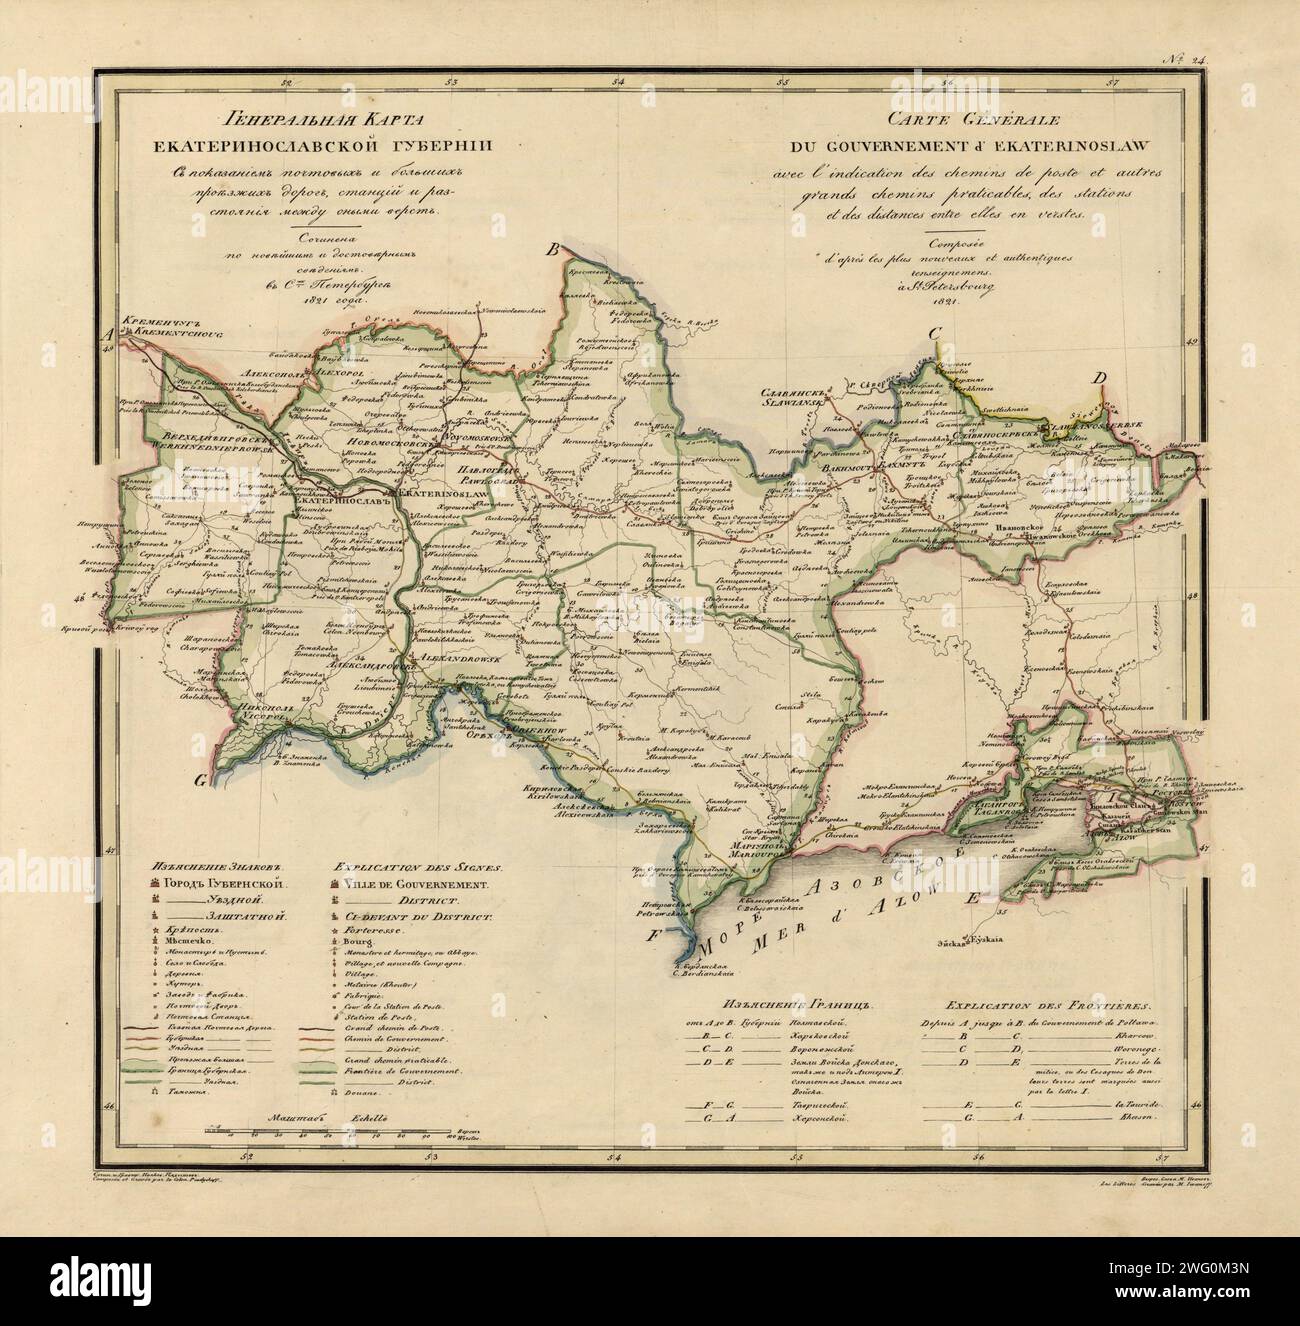 General Map of Ekaterinoslav Province: Showing Postal and Major Roads, Stations and the Distance in Versts between Them, 1821. This 1821 map of Ekaterinoslav Provinceis from a larger work,Geograficheskii atlas Rossiiskoi imperii, tsarstva Pol'skogo i velikogo kniazhestva Finliandskogo(Geographical atlas of the Russian Empire, the Kingdom of Poland, and the Grand Duchy of Finland), containing 60 maps of the Russian Empire. Compiled and engraved by Colonel V.P. Piadyshev, it reflects the detailed mapping carried out by Russian military cartographers in the first quarter of the 19th century. The Stock Photo